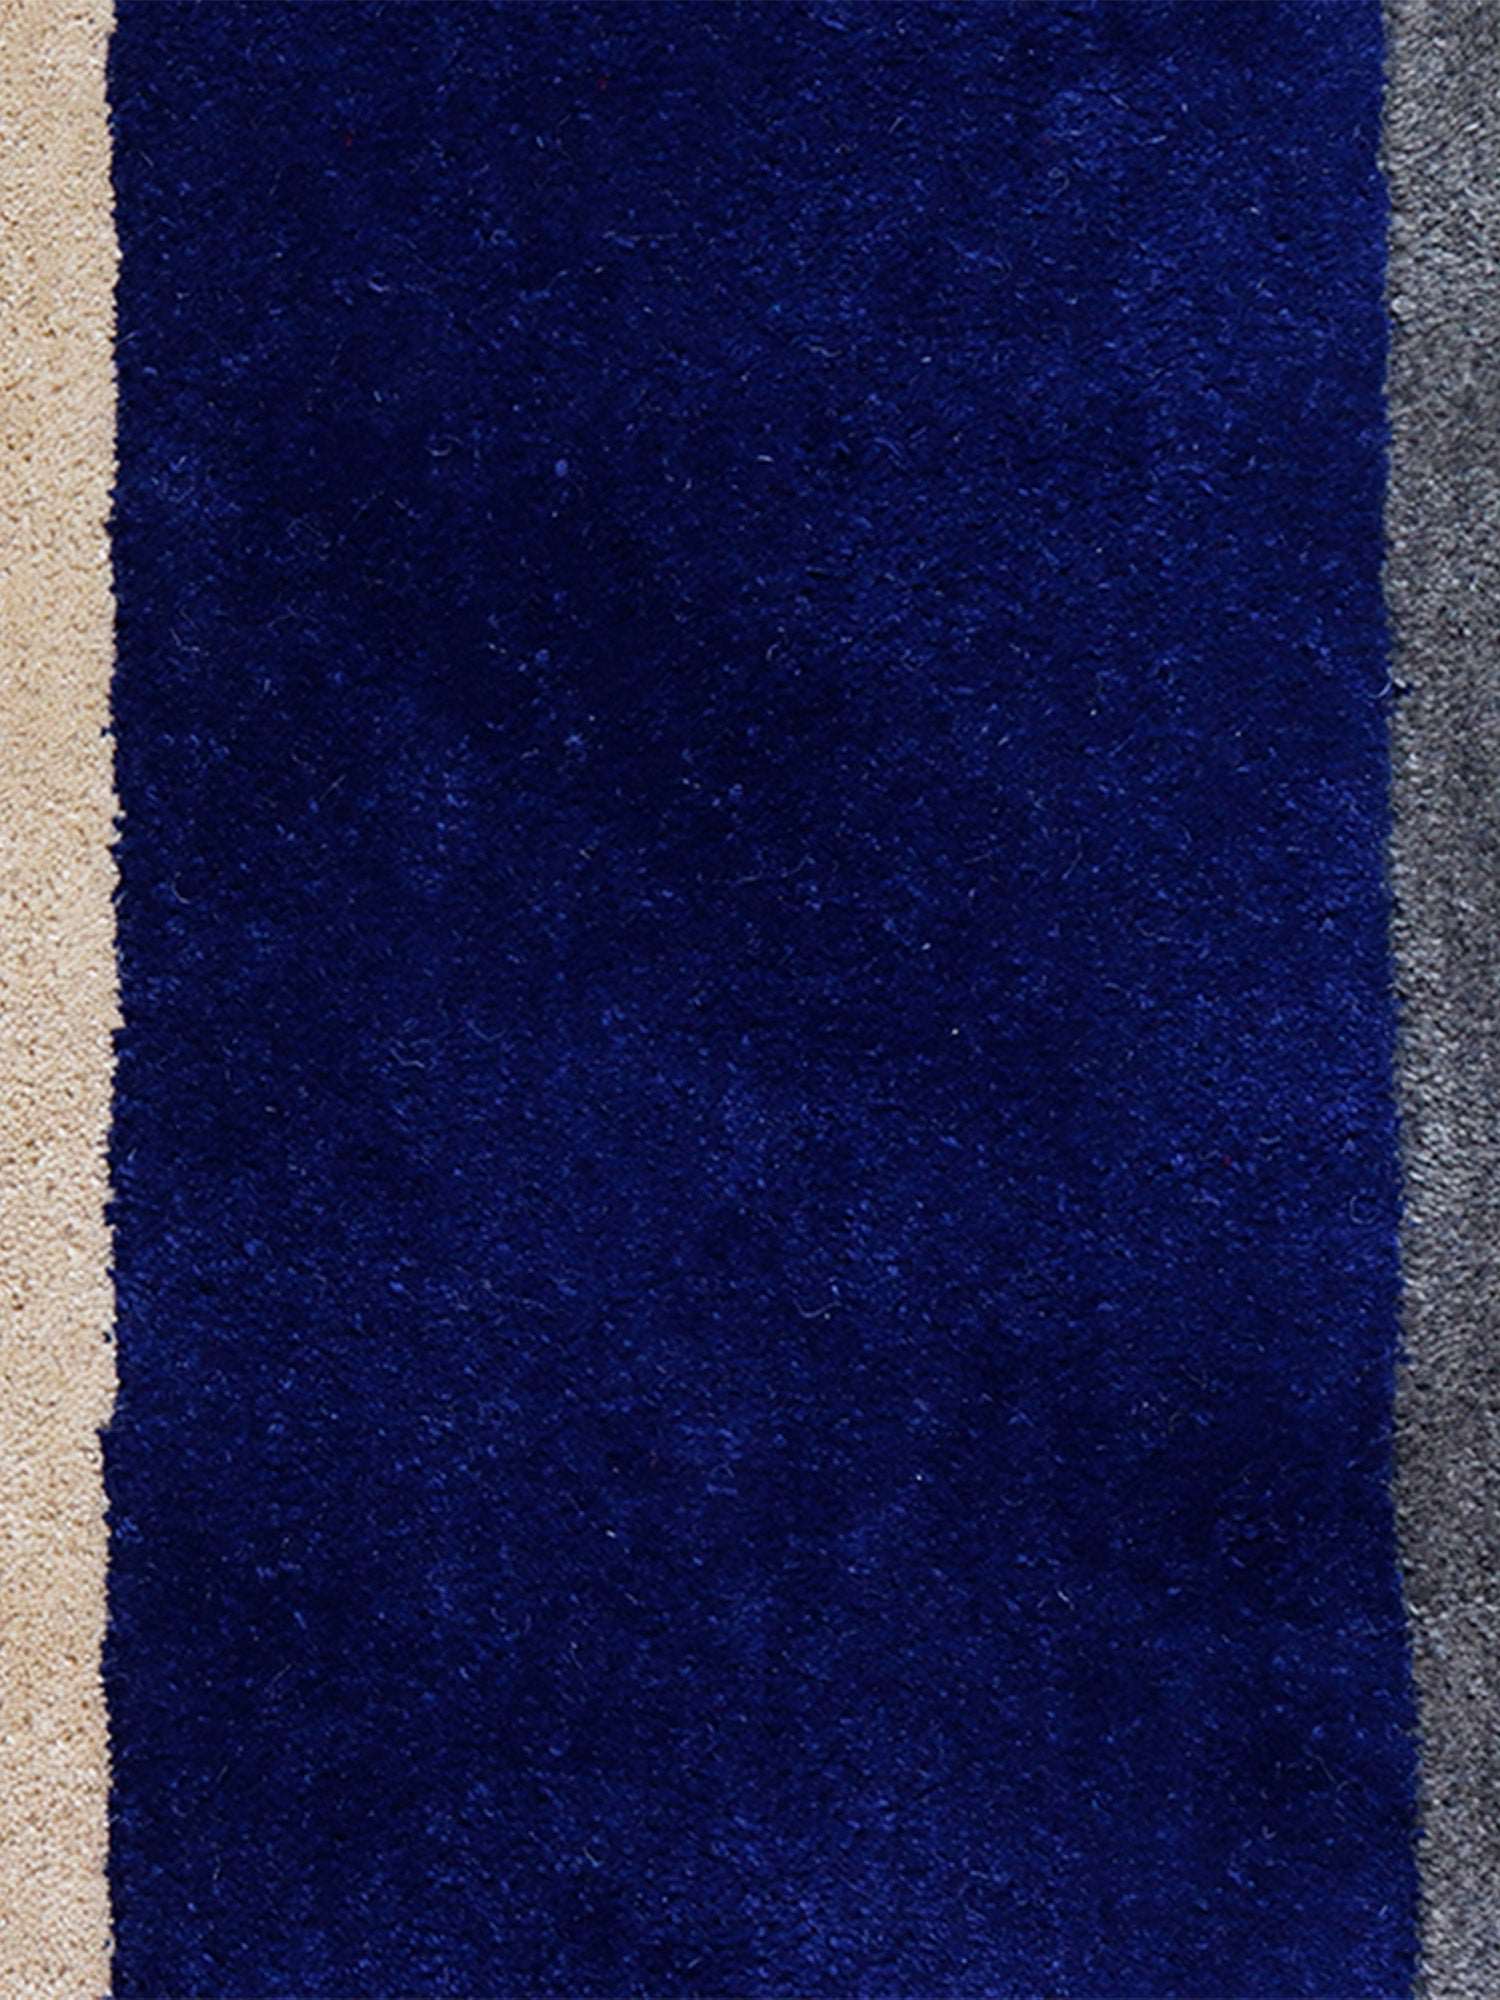 Carpet Hand Tufted 100% Woollen Off White Navy Grey Stripes Nautical - 4ft X 6ft